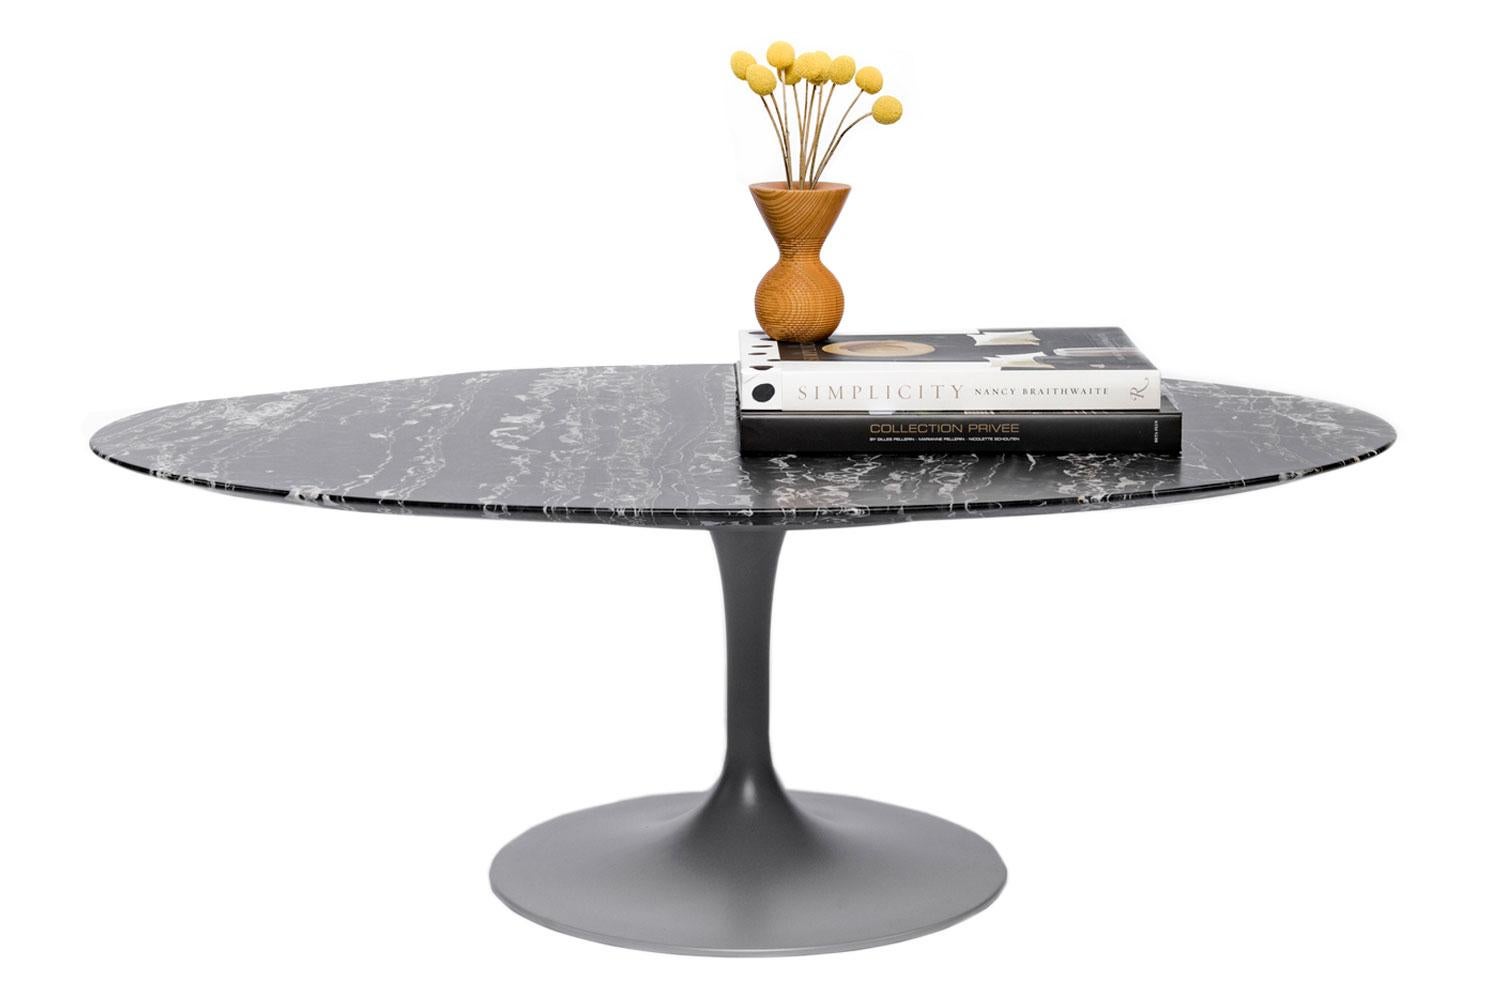 Saarinen coffee table 43” oval By Knoll
Eero Saarinen 1957

This collection is a defining accomplishment of modern design and a timeless piece for Knoll. This Saarinen Coffee table finish a matte grey base with Portoro black marble satin